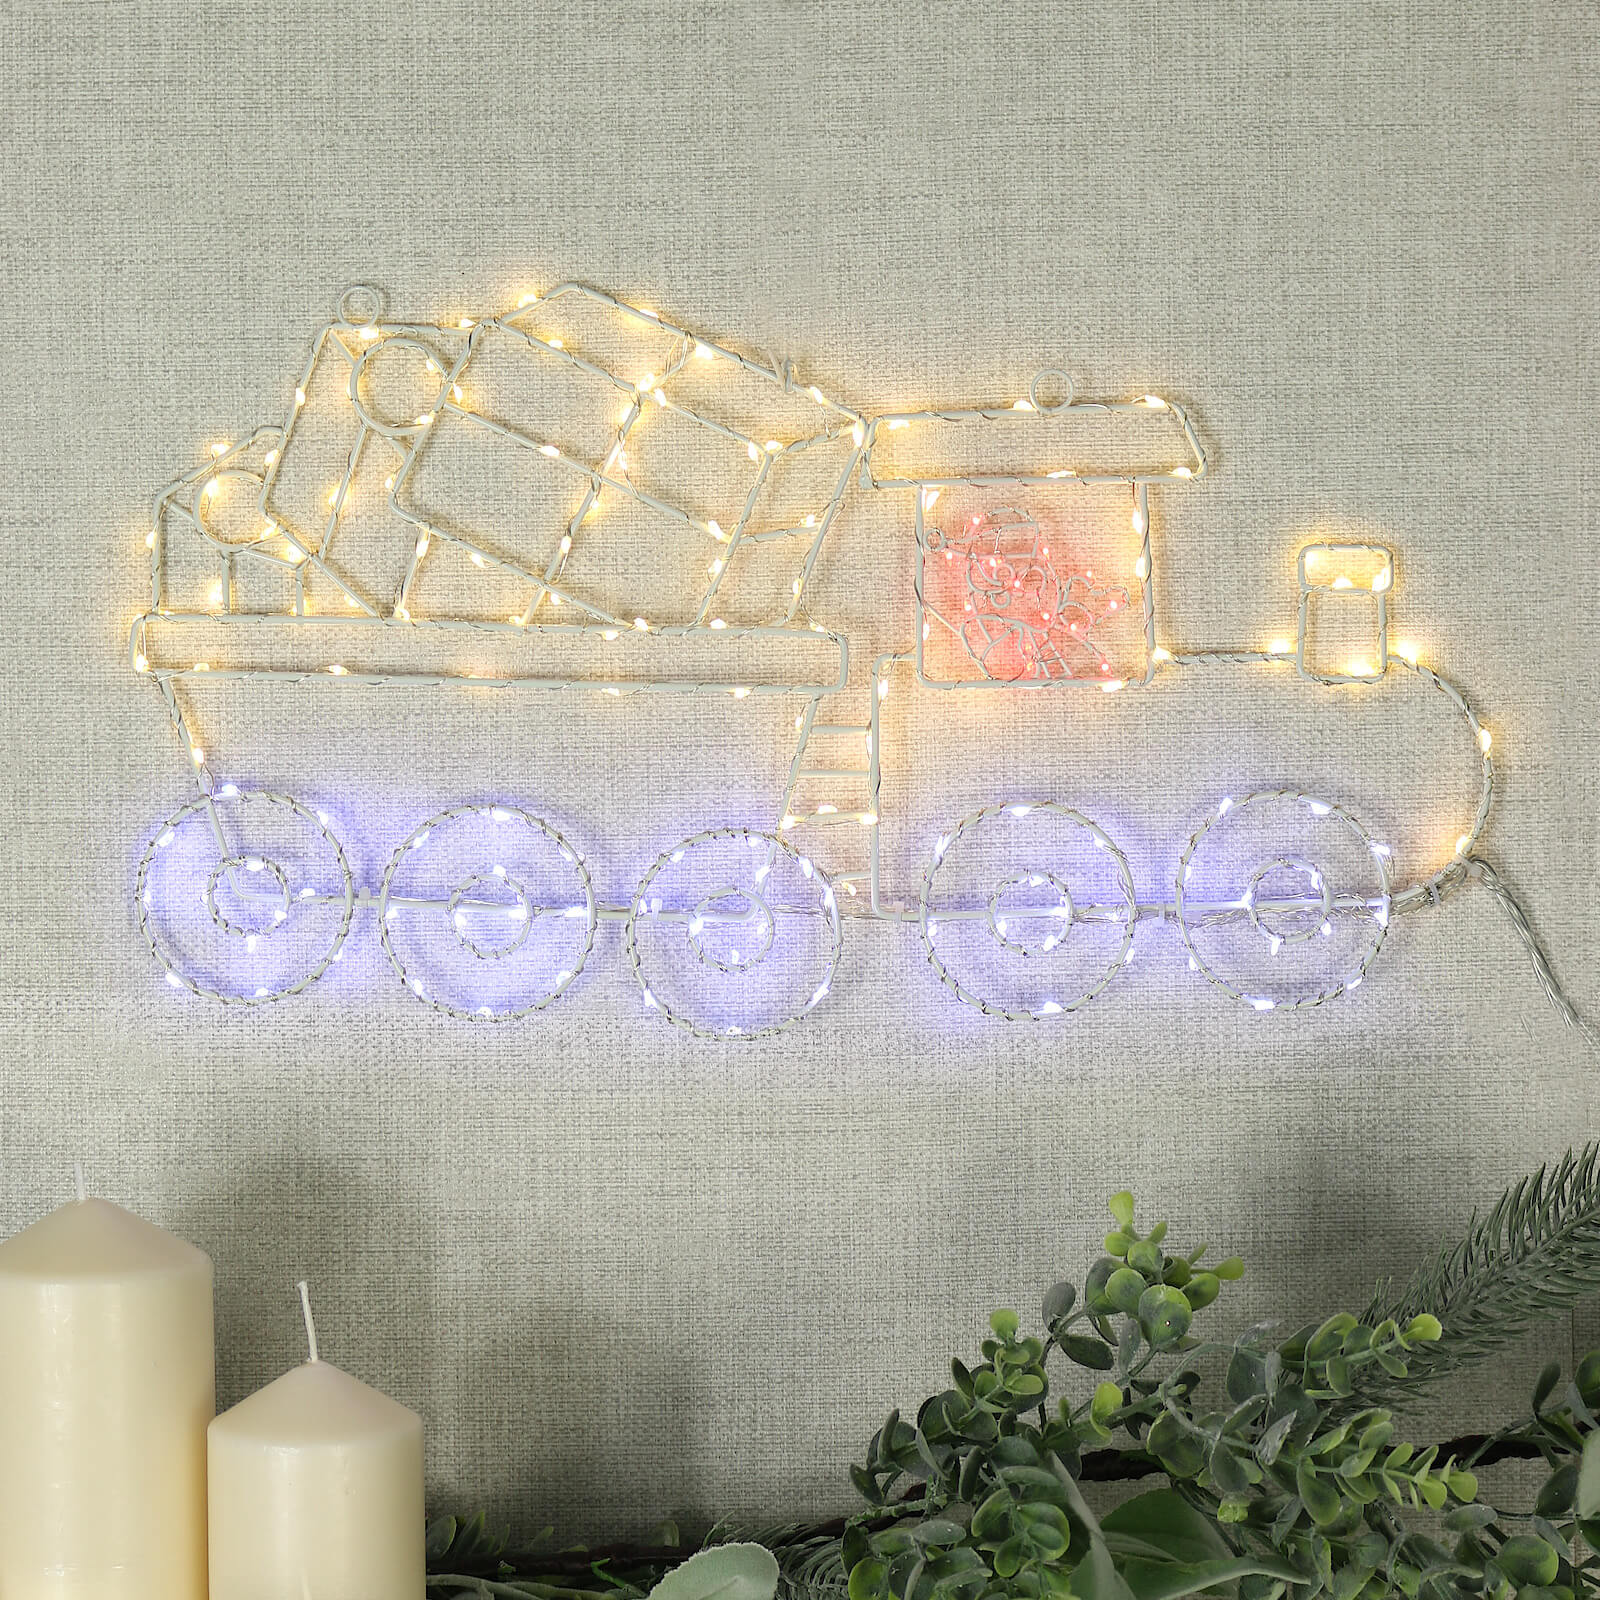 santa train light on wall with candles and garland underneath it